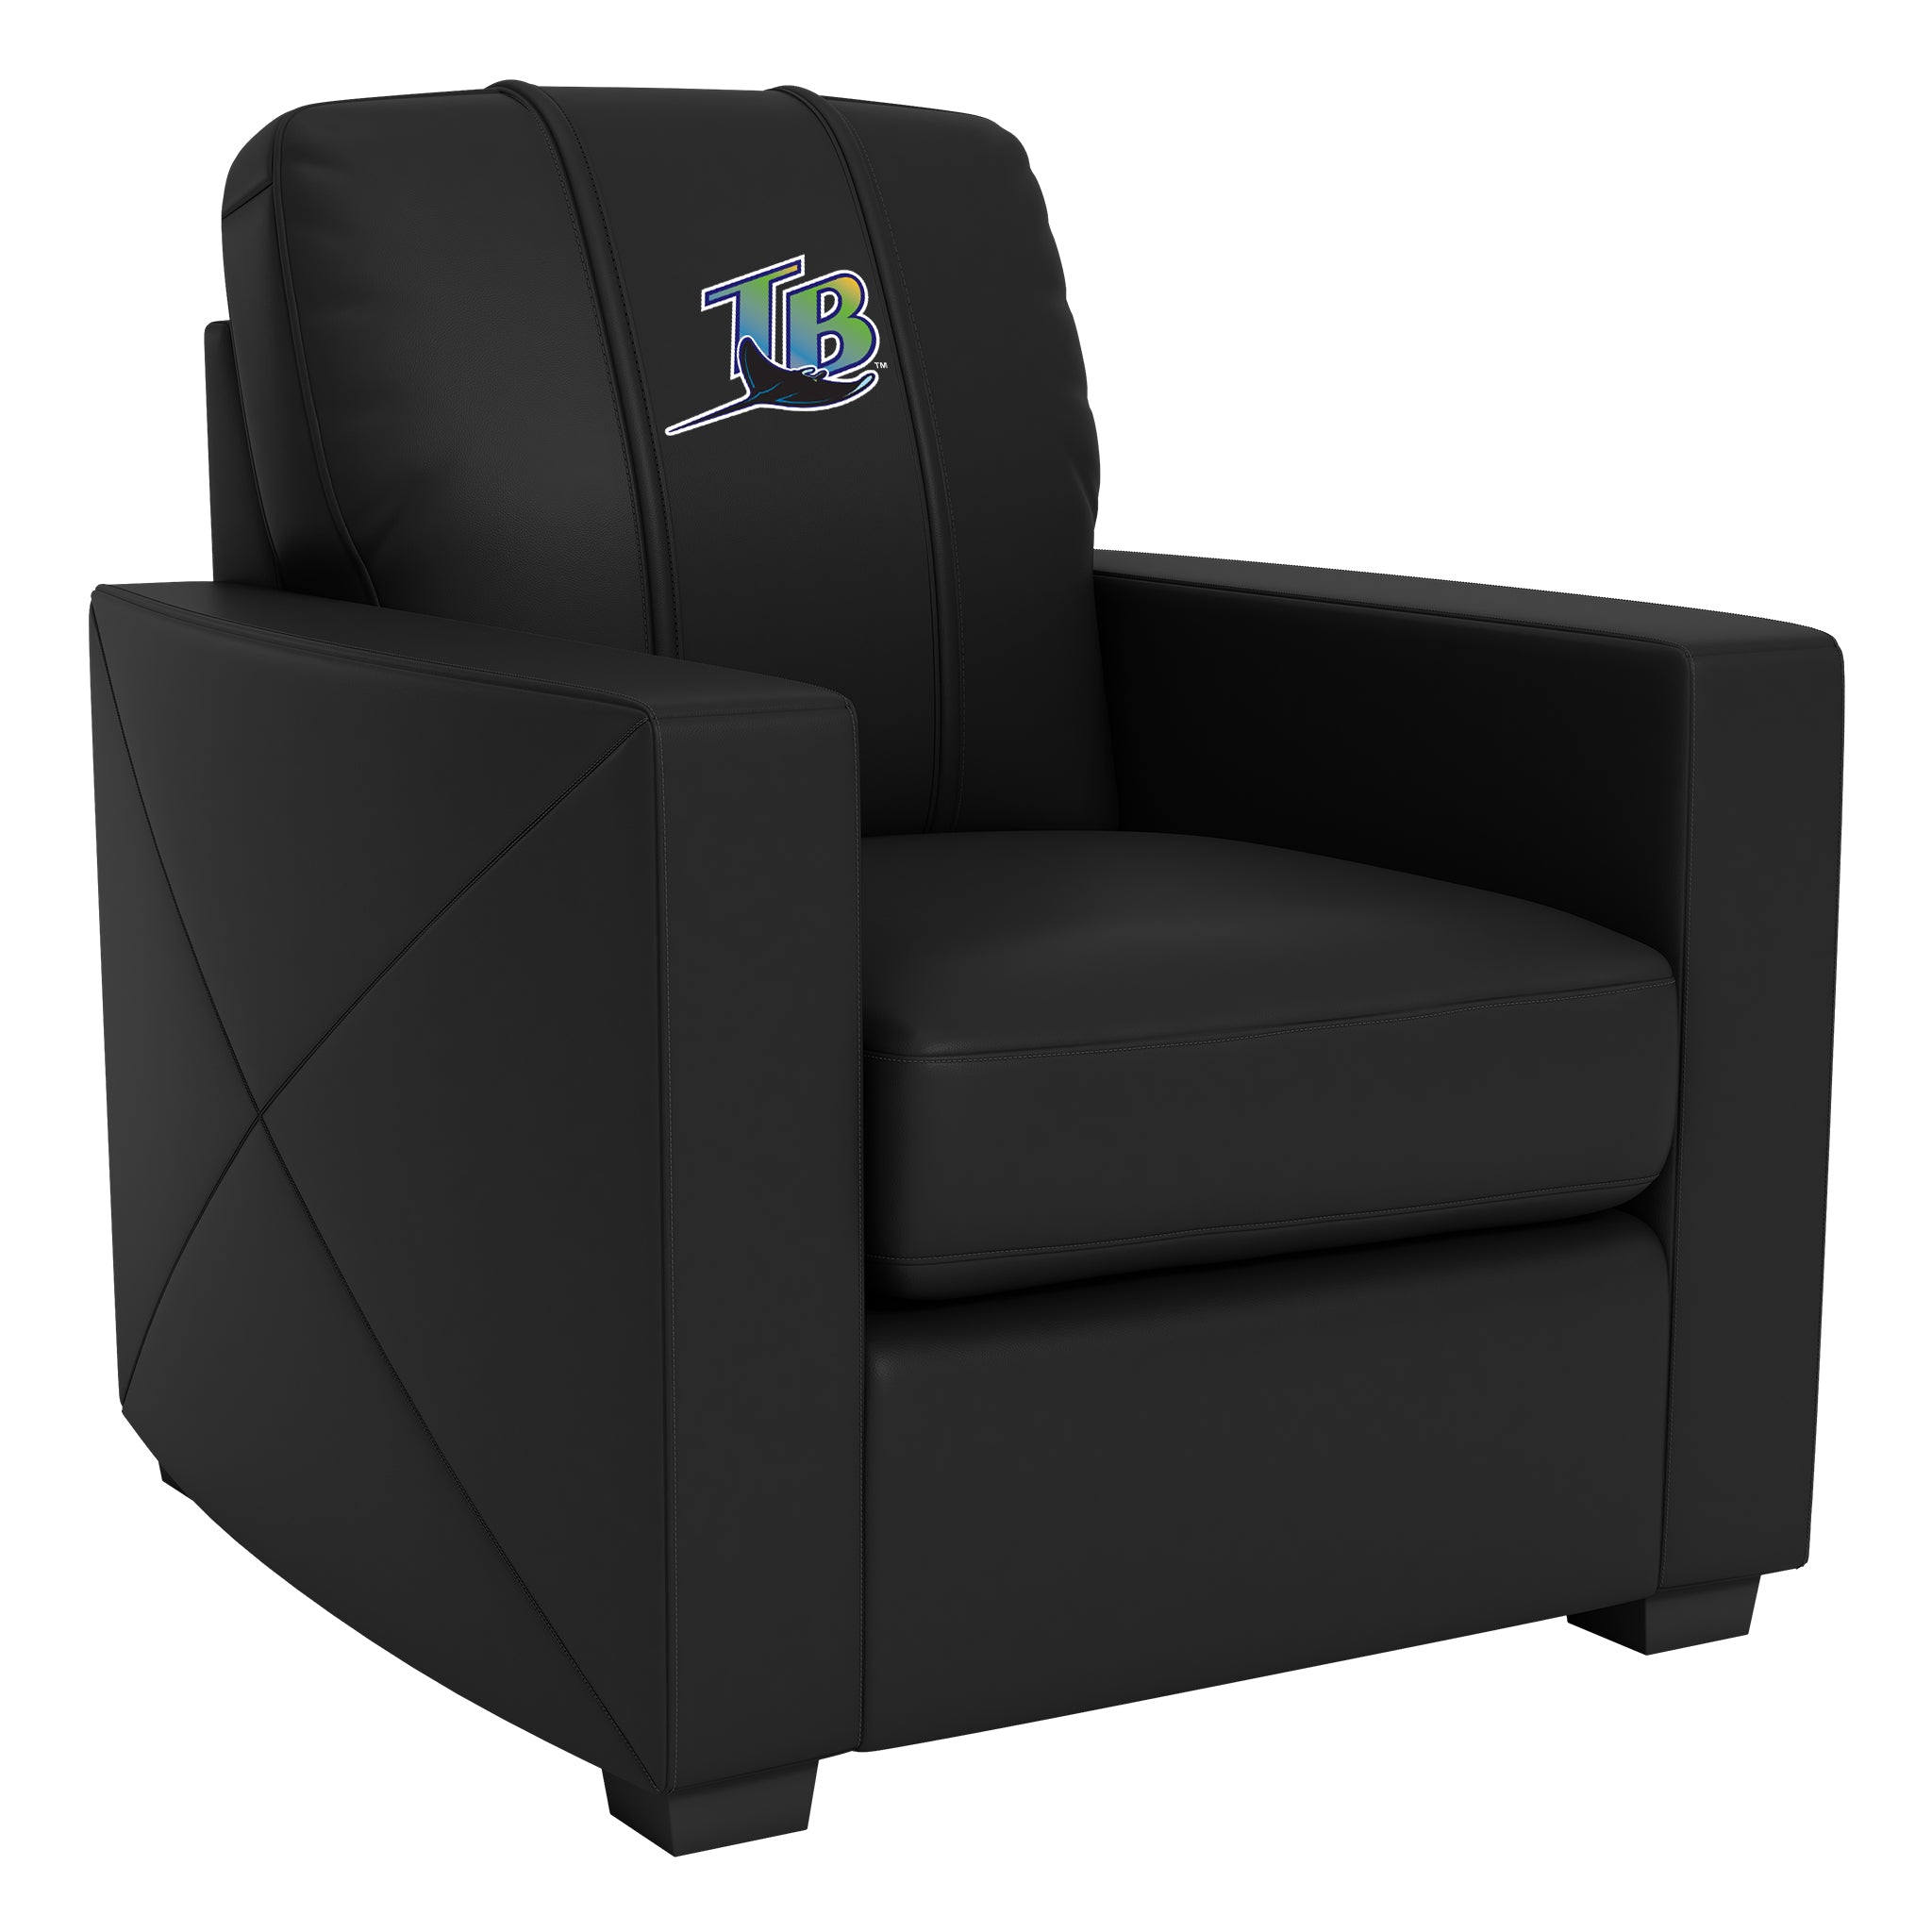 Silver Club Chair with Tampa Bay Rays Cooperstown Secondary